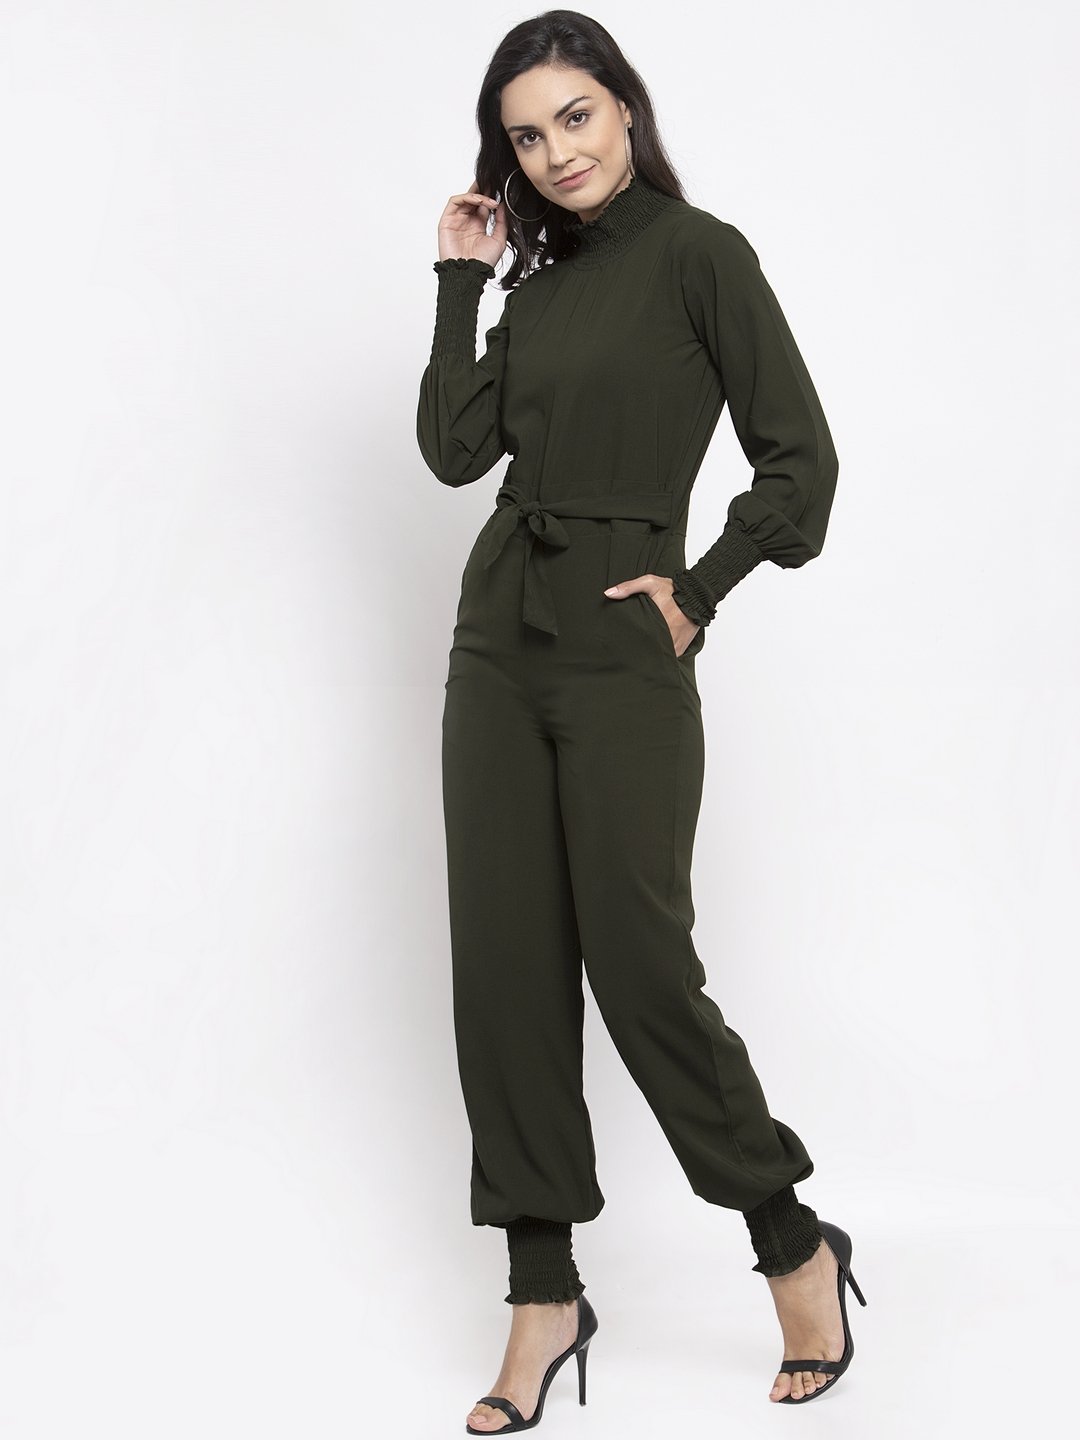 Women's Olive Green Solid Basic Jumpsuit - Jompers